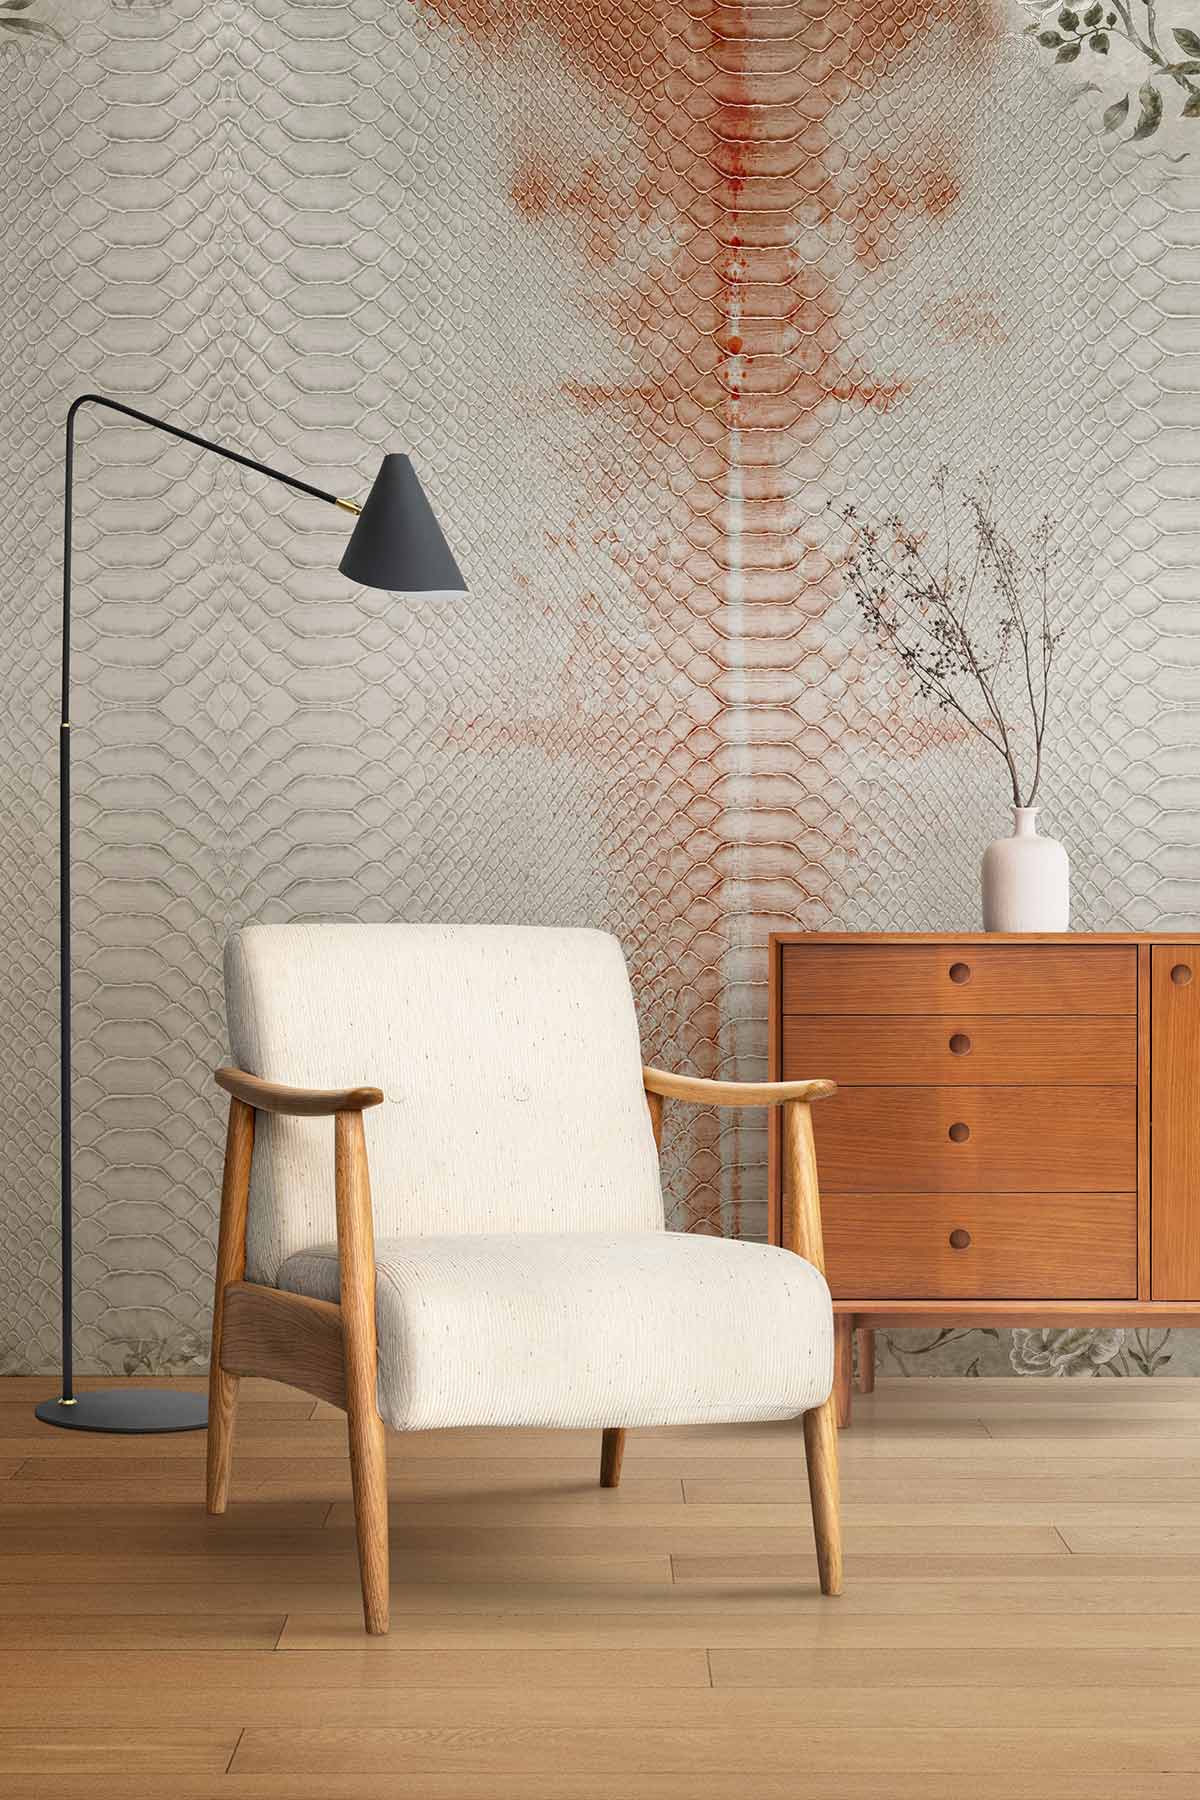 A wallpaper mural for the hallway with snake skin and flowers